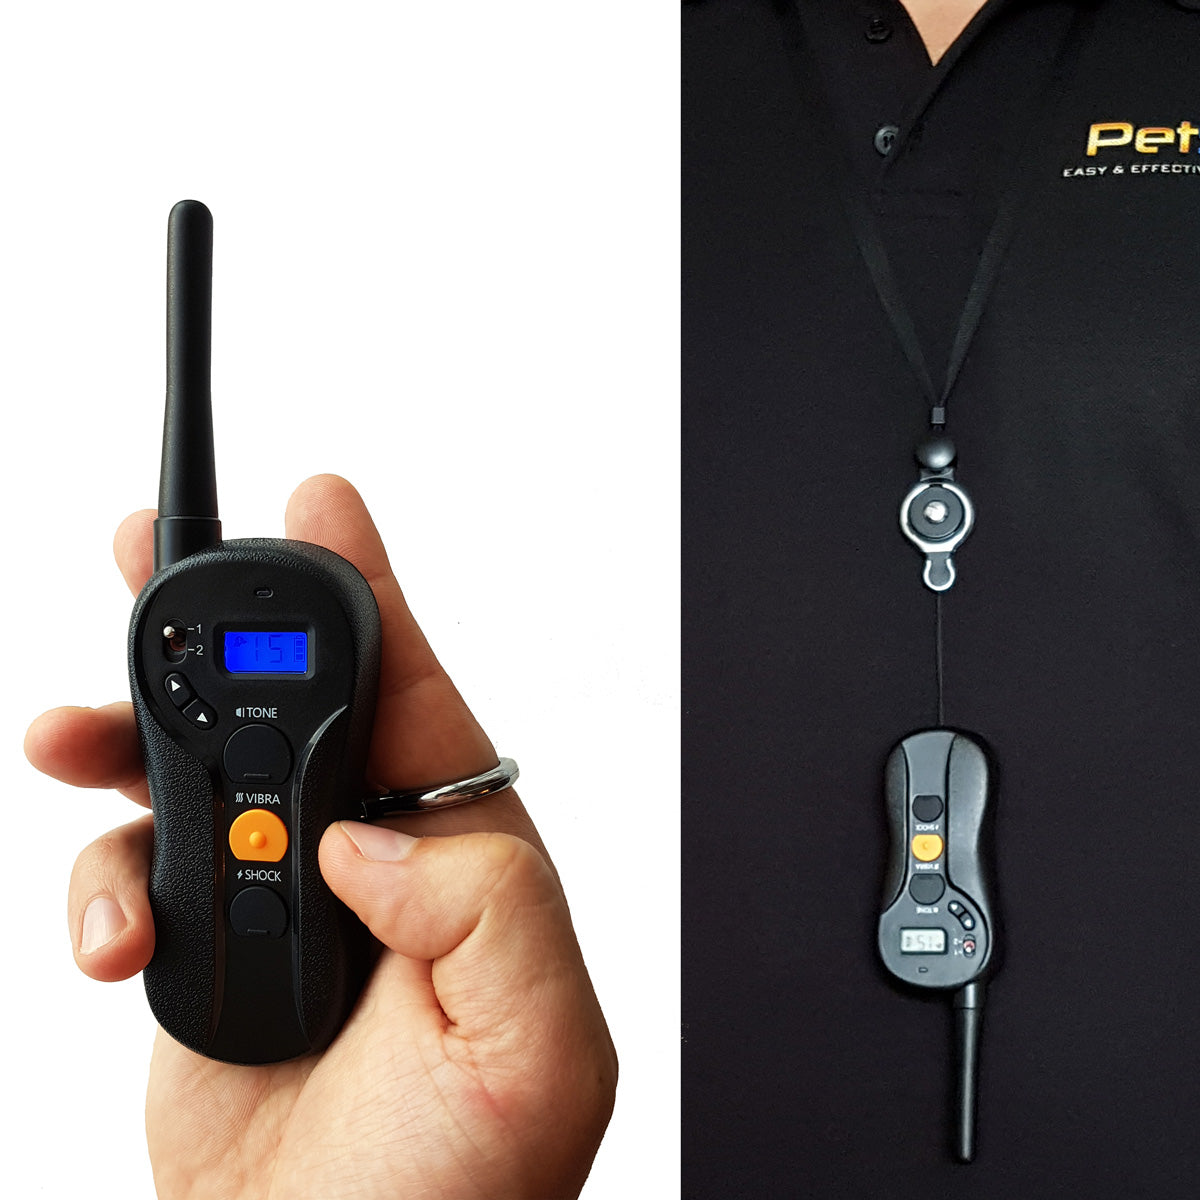 Lanyard for dog training remote transmitters_The soft material prevents irritation making it suitable for all-day use